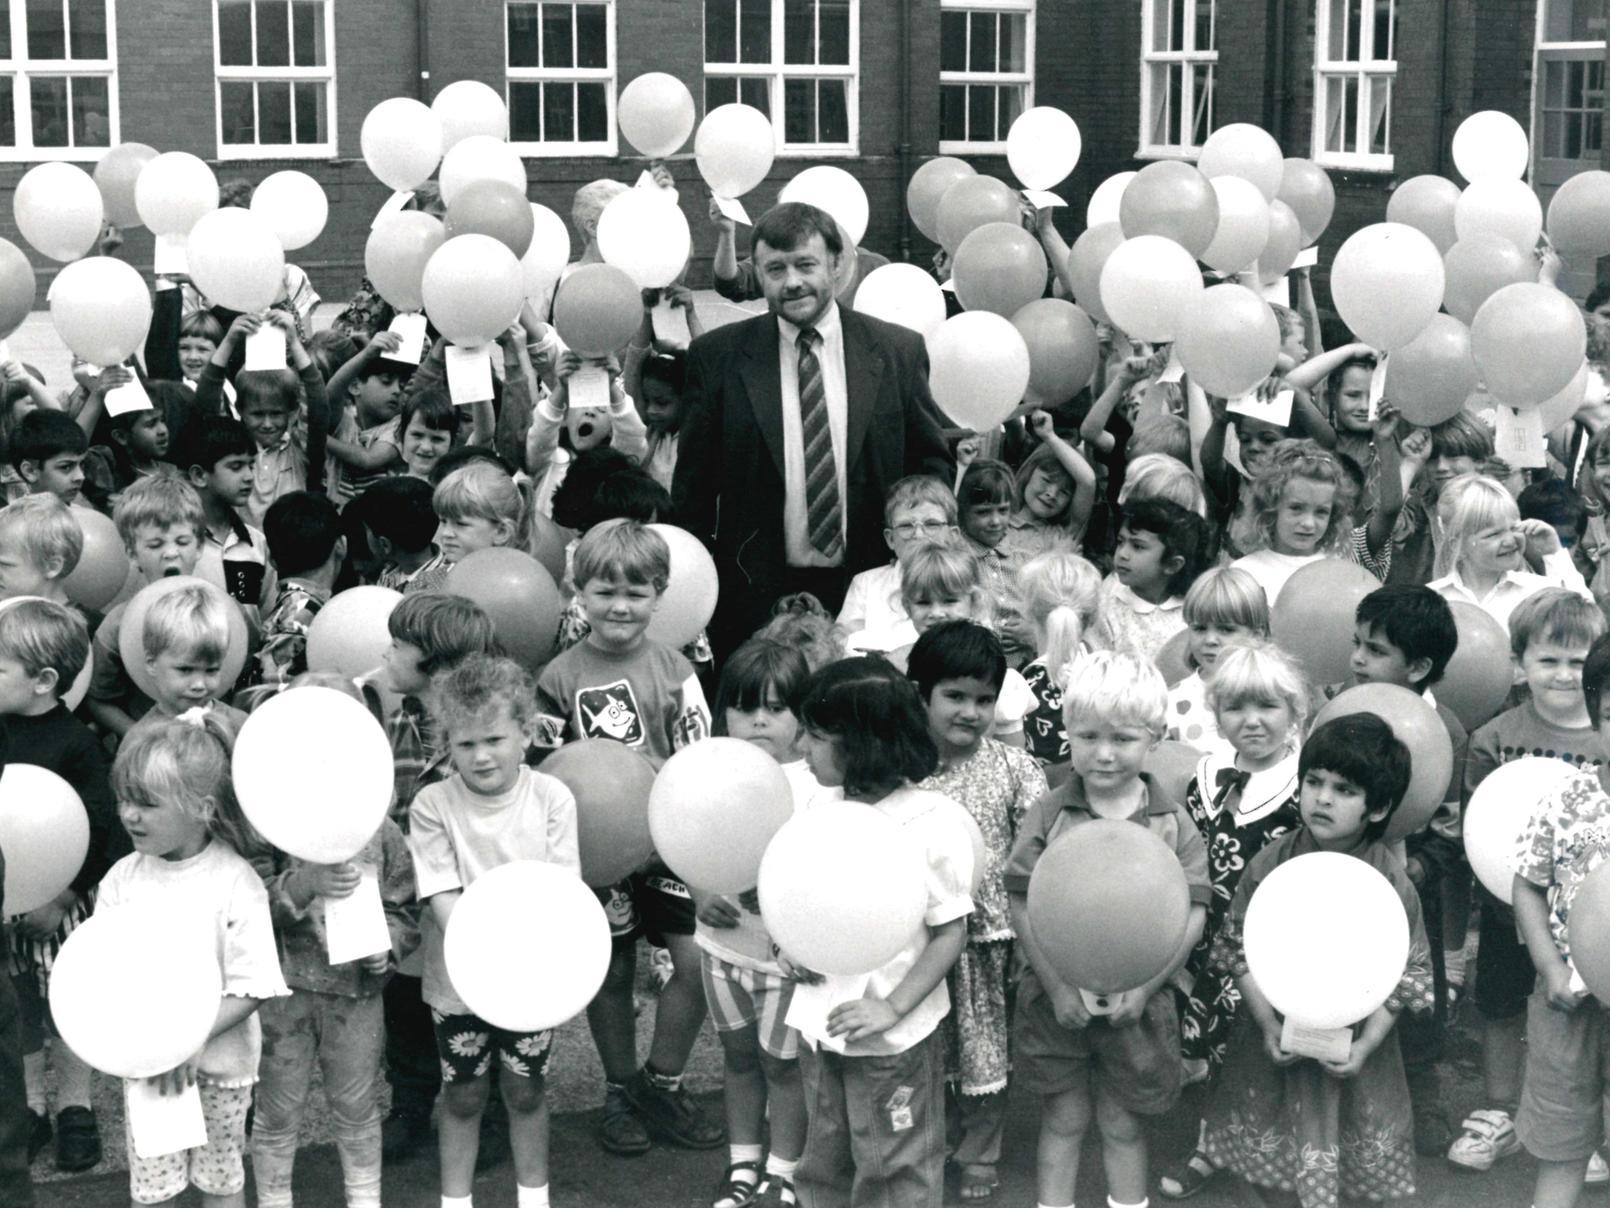 Lawefield Lane School. Reopening of building. Published in the Wakefield Express 5.8.1994